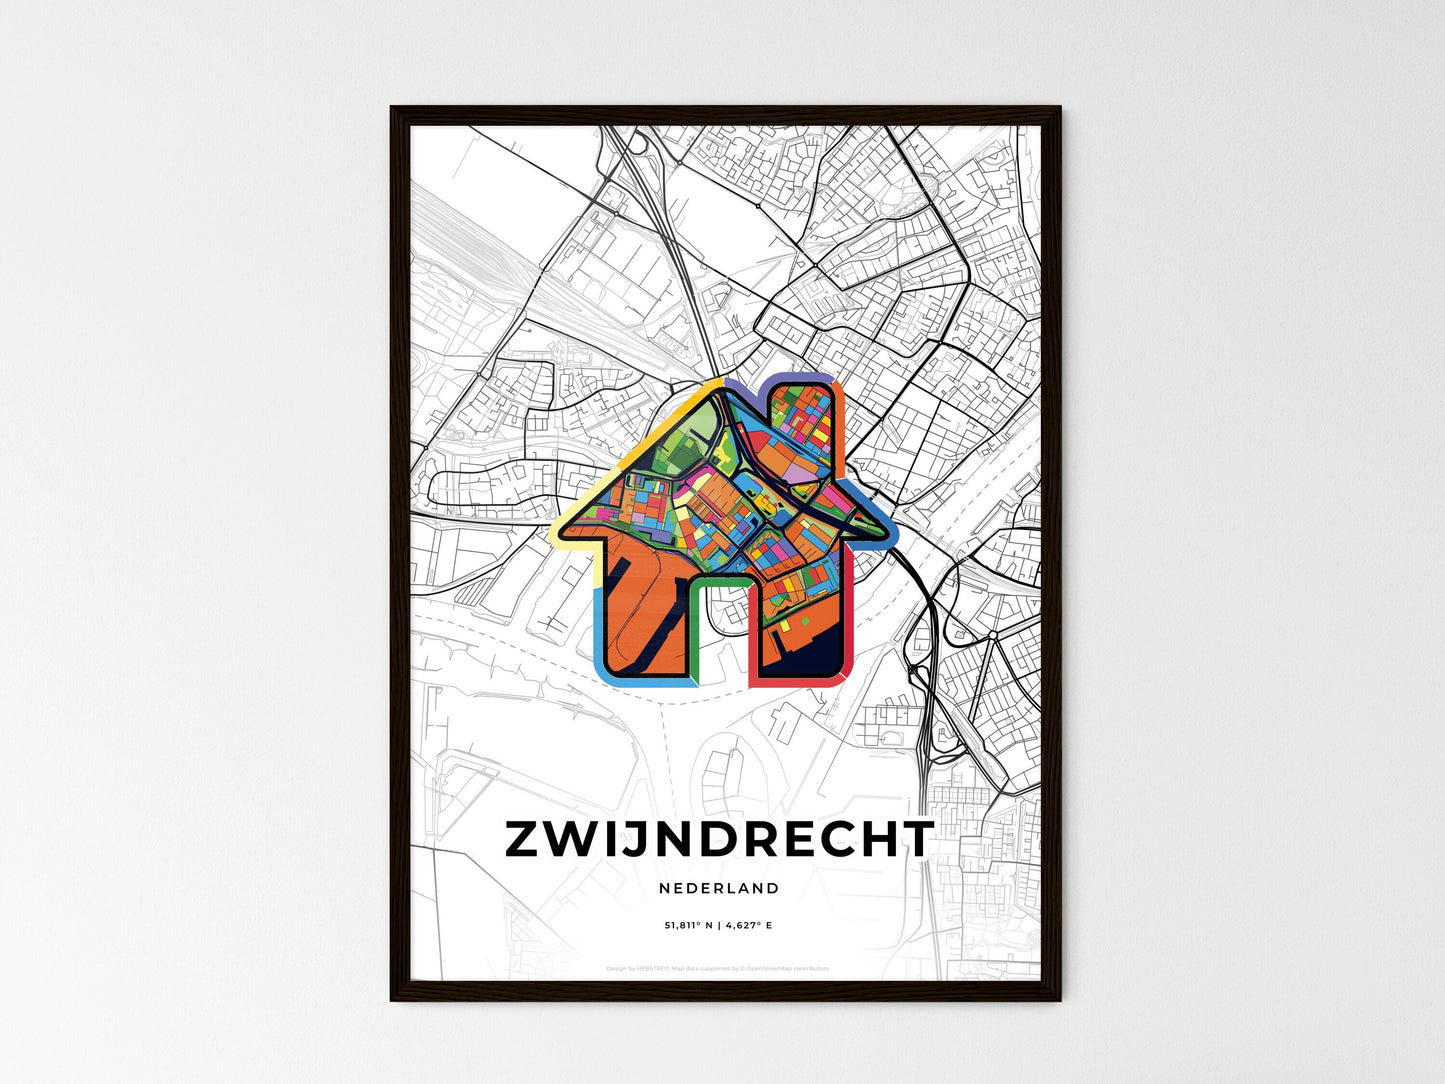 ZWIJNDRECHT NETHERLANDS minimal art map with a colorful icon. Where it all began, Couple map gift. Style 3